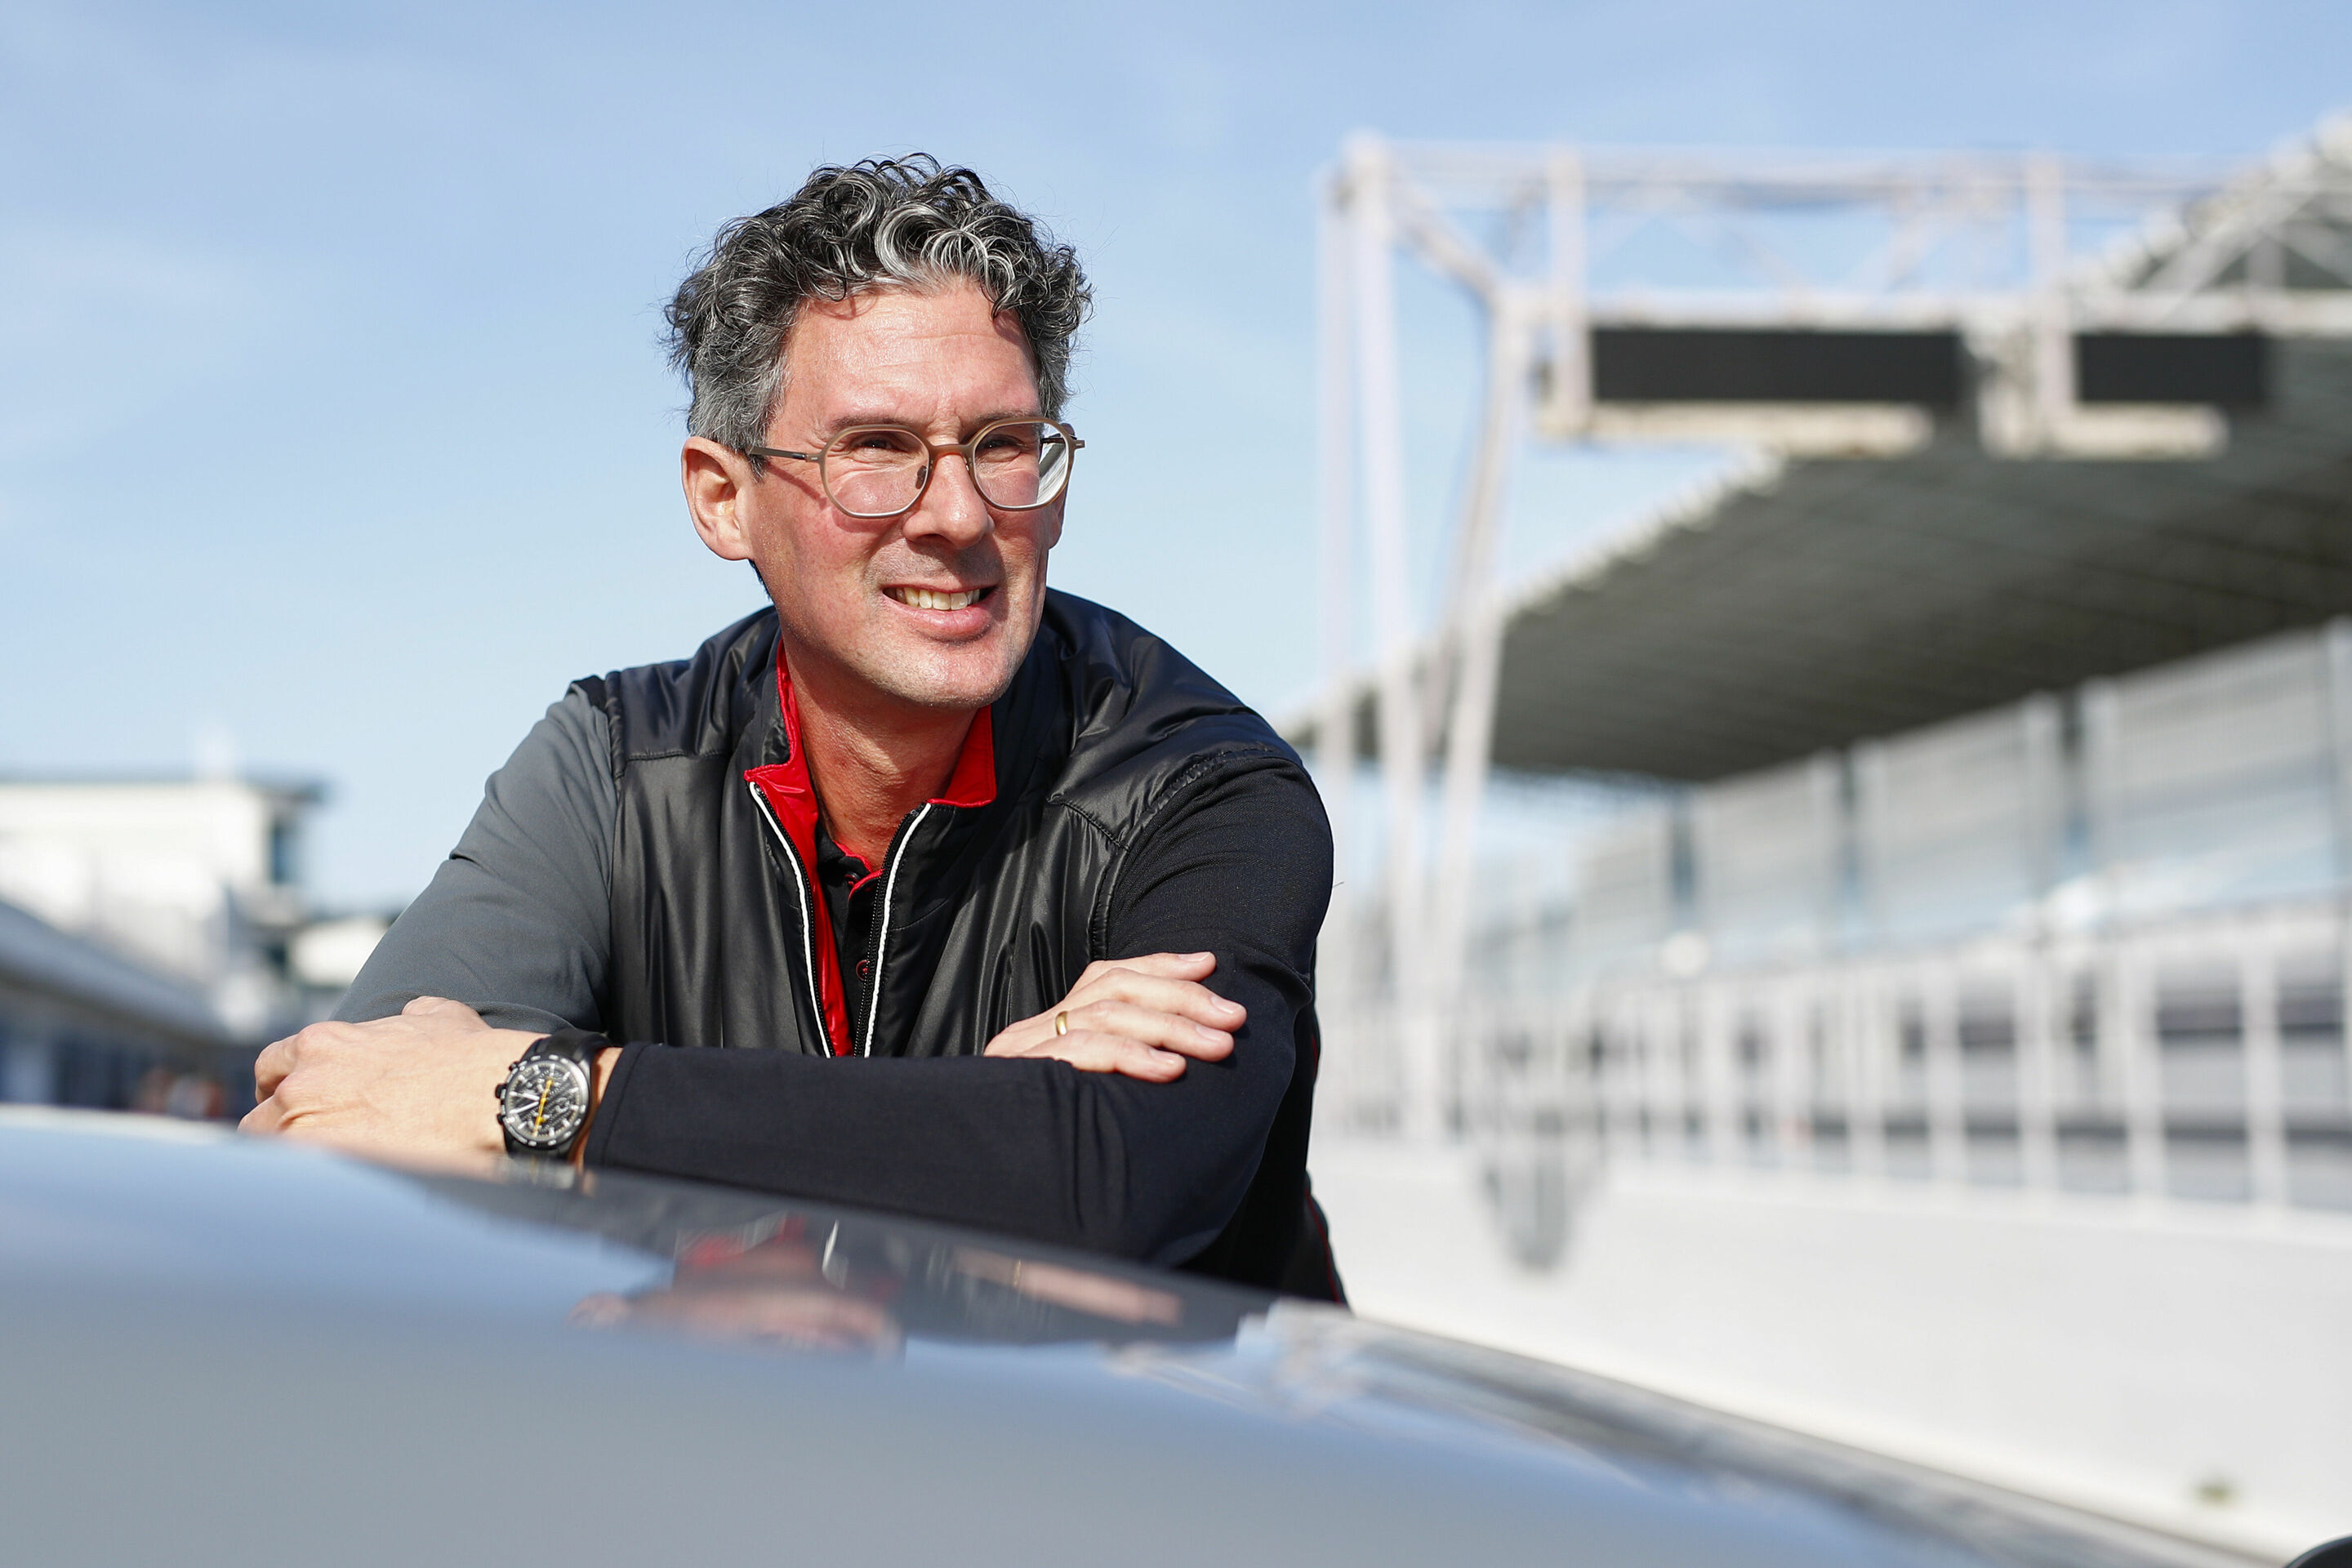 Frank-Steffen Walliser to become new CEO at Bentley